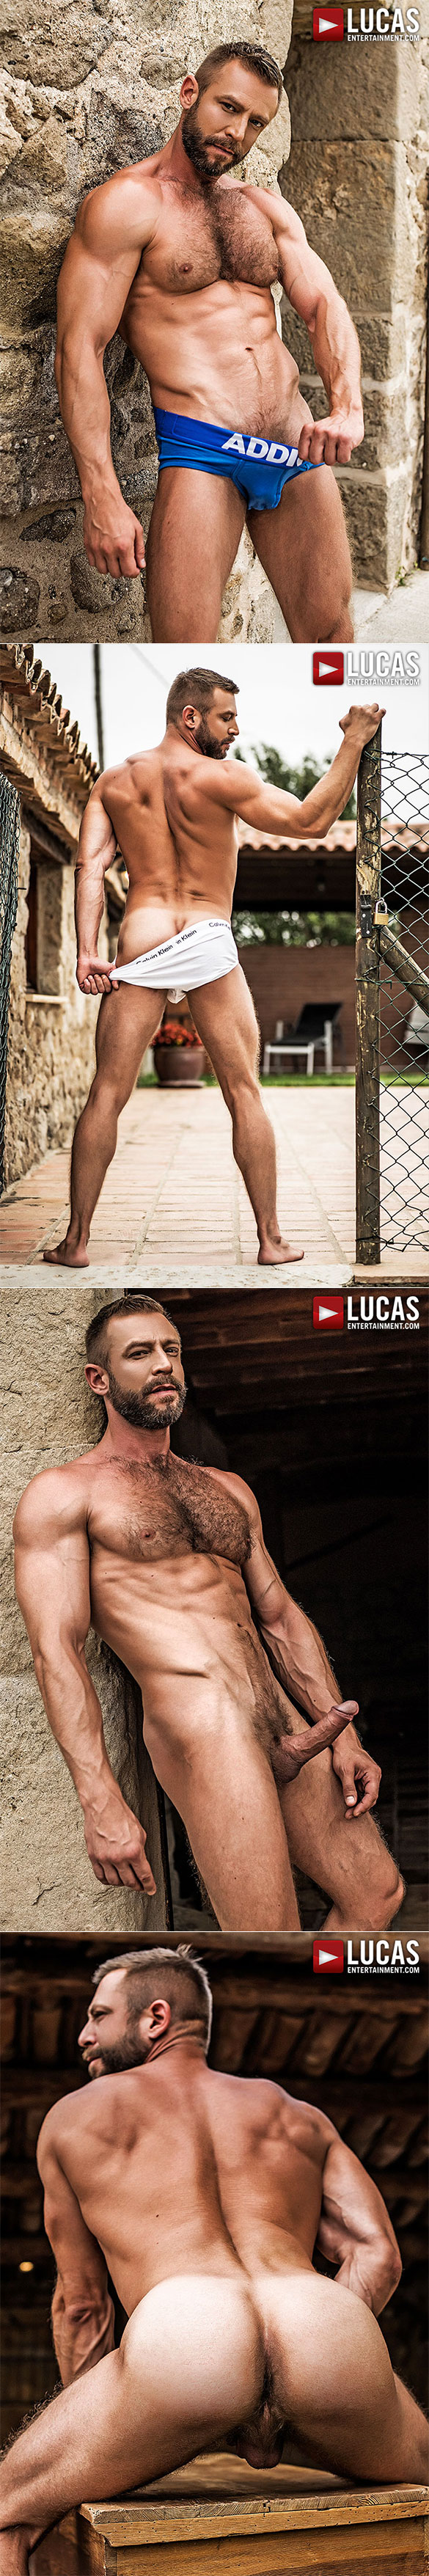 Lucas Entertainment: Bulrog takes command of Ace Era and Michael Roman in "Ass Fucking Alpha Males"